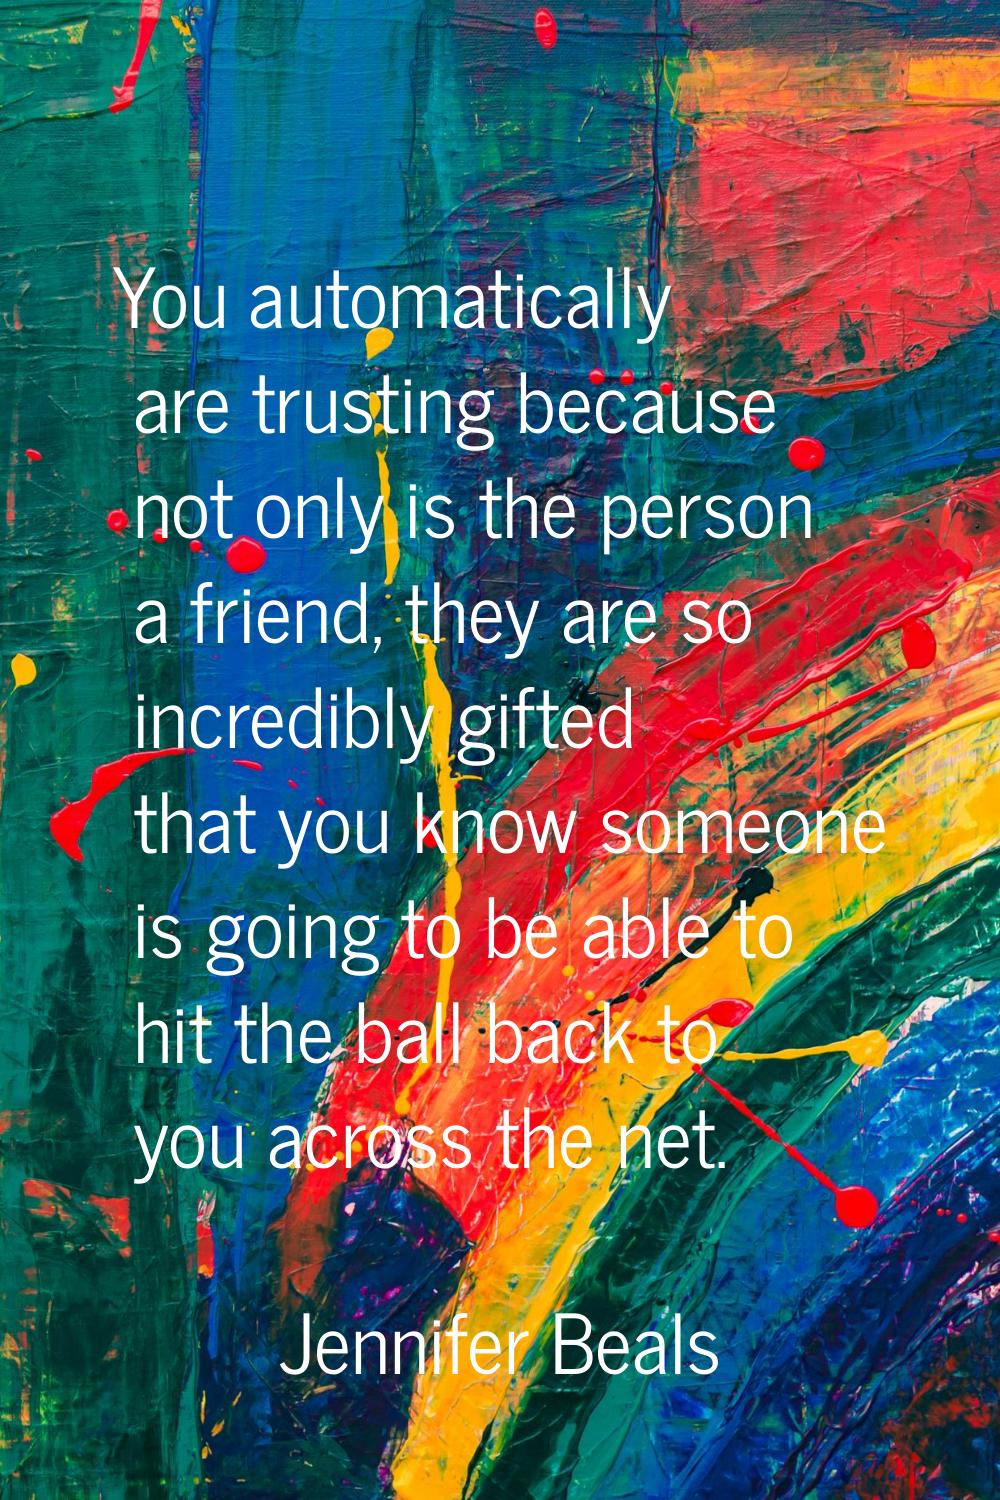 You automatically are trusting because not only is the person a friend, they are so incredibly gift